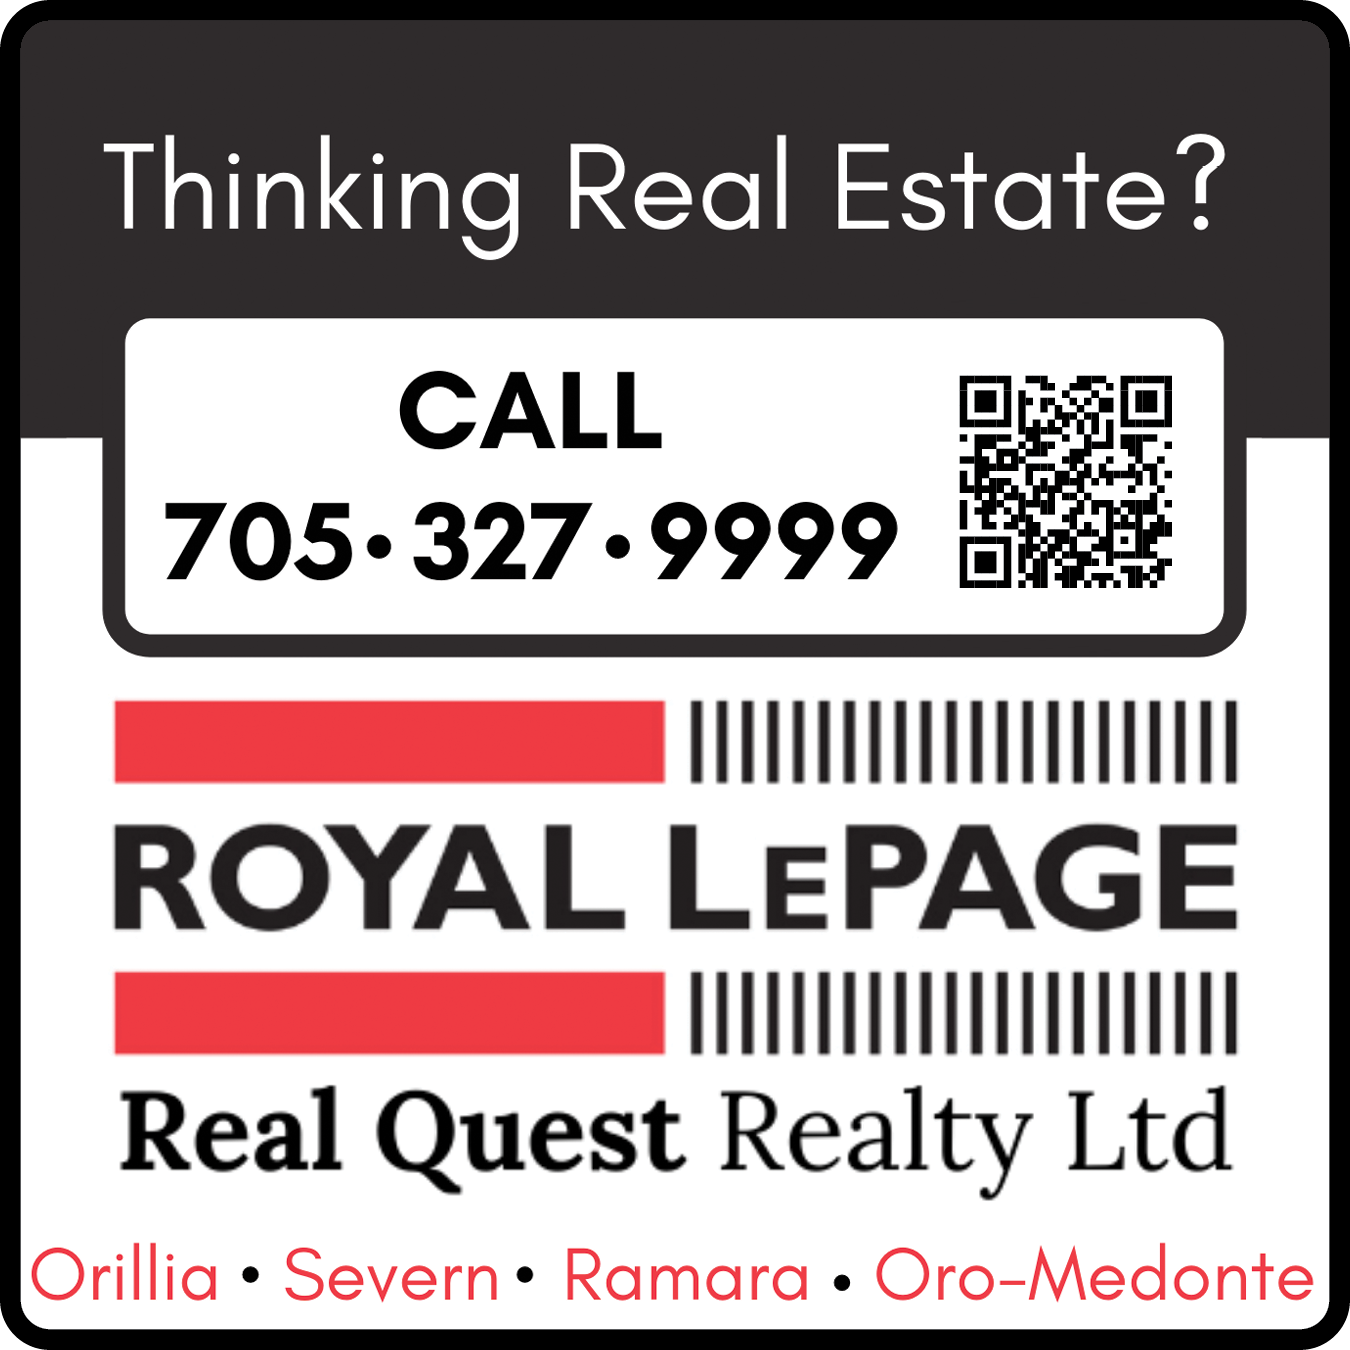 Royal LePage Real Quest Realty Ltd. - Anastasia Langiano